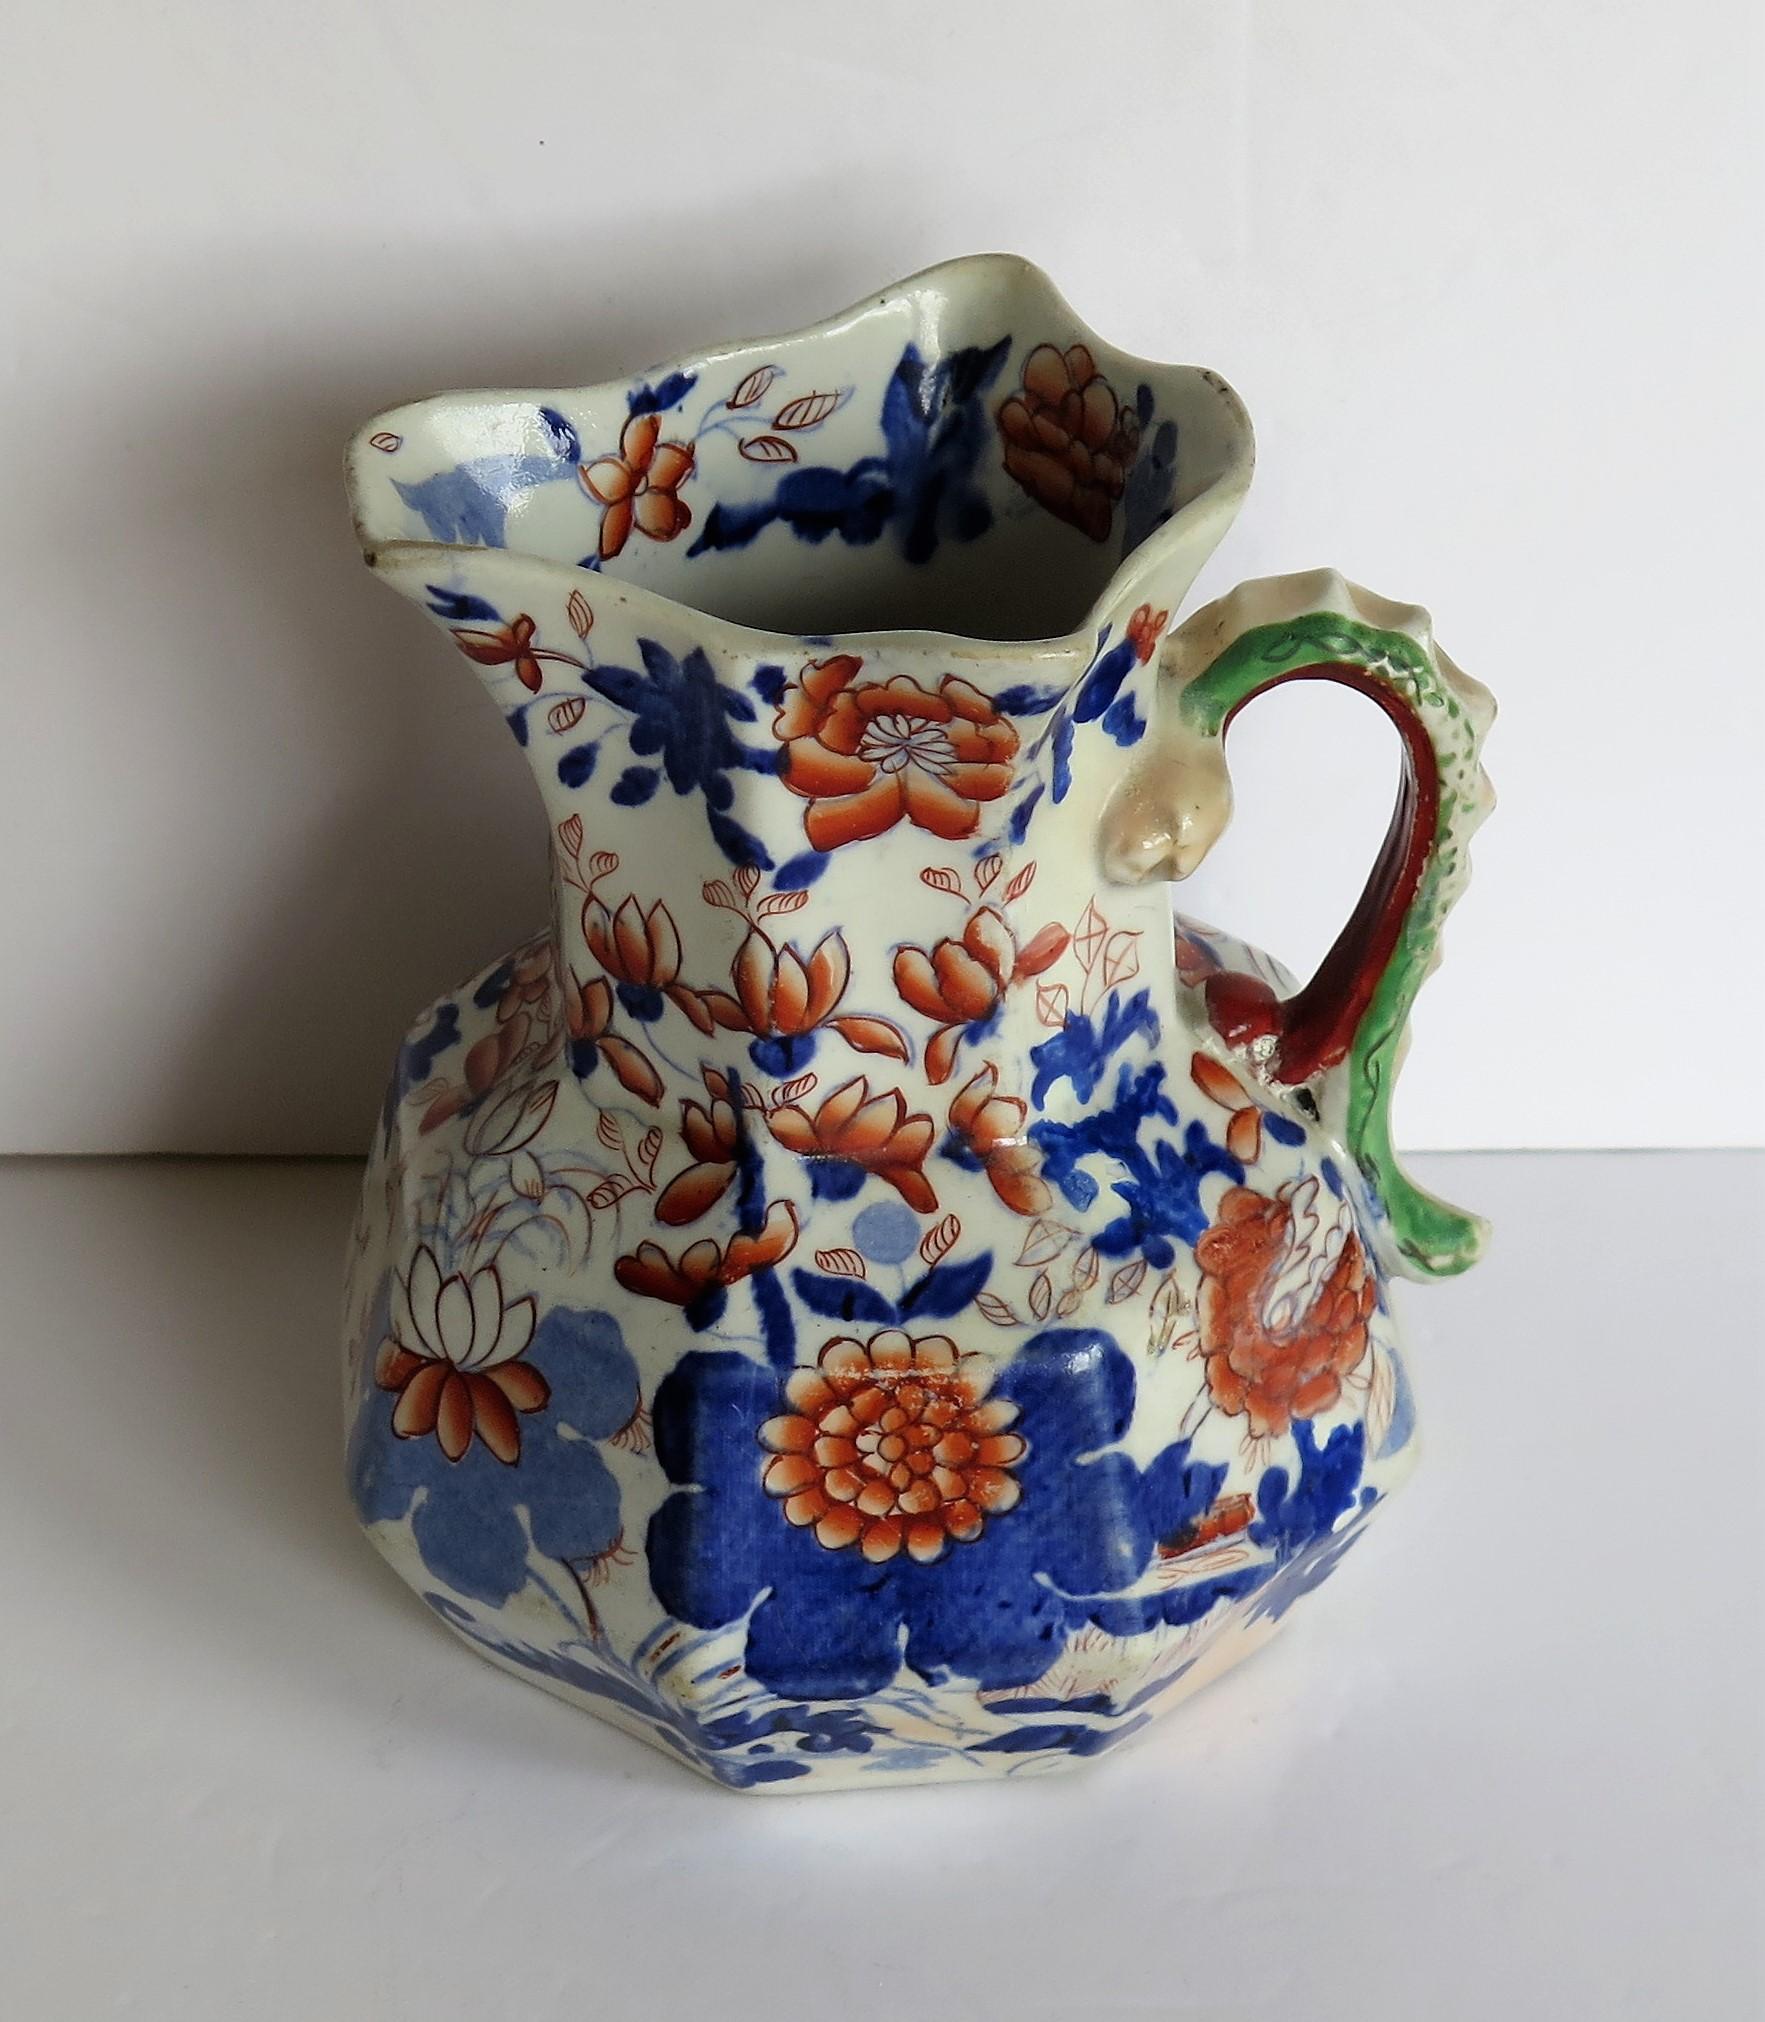 This is a good, early Mason's Ironstone Hydra jug or pitcher in the basket Japan pattern, made in the English, late Georgian period, circa 1820.

The jug has an octagonal shape with a notched snake handle and is decorated in the distinctive